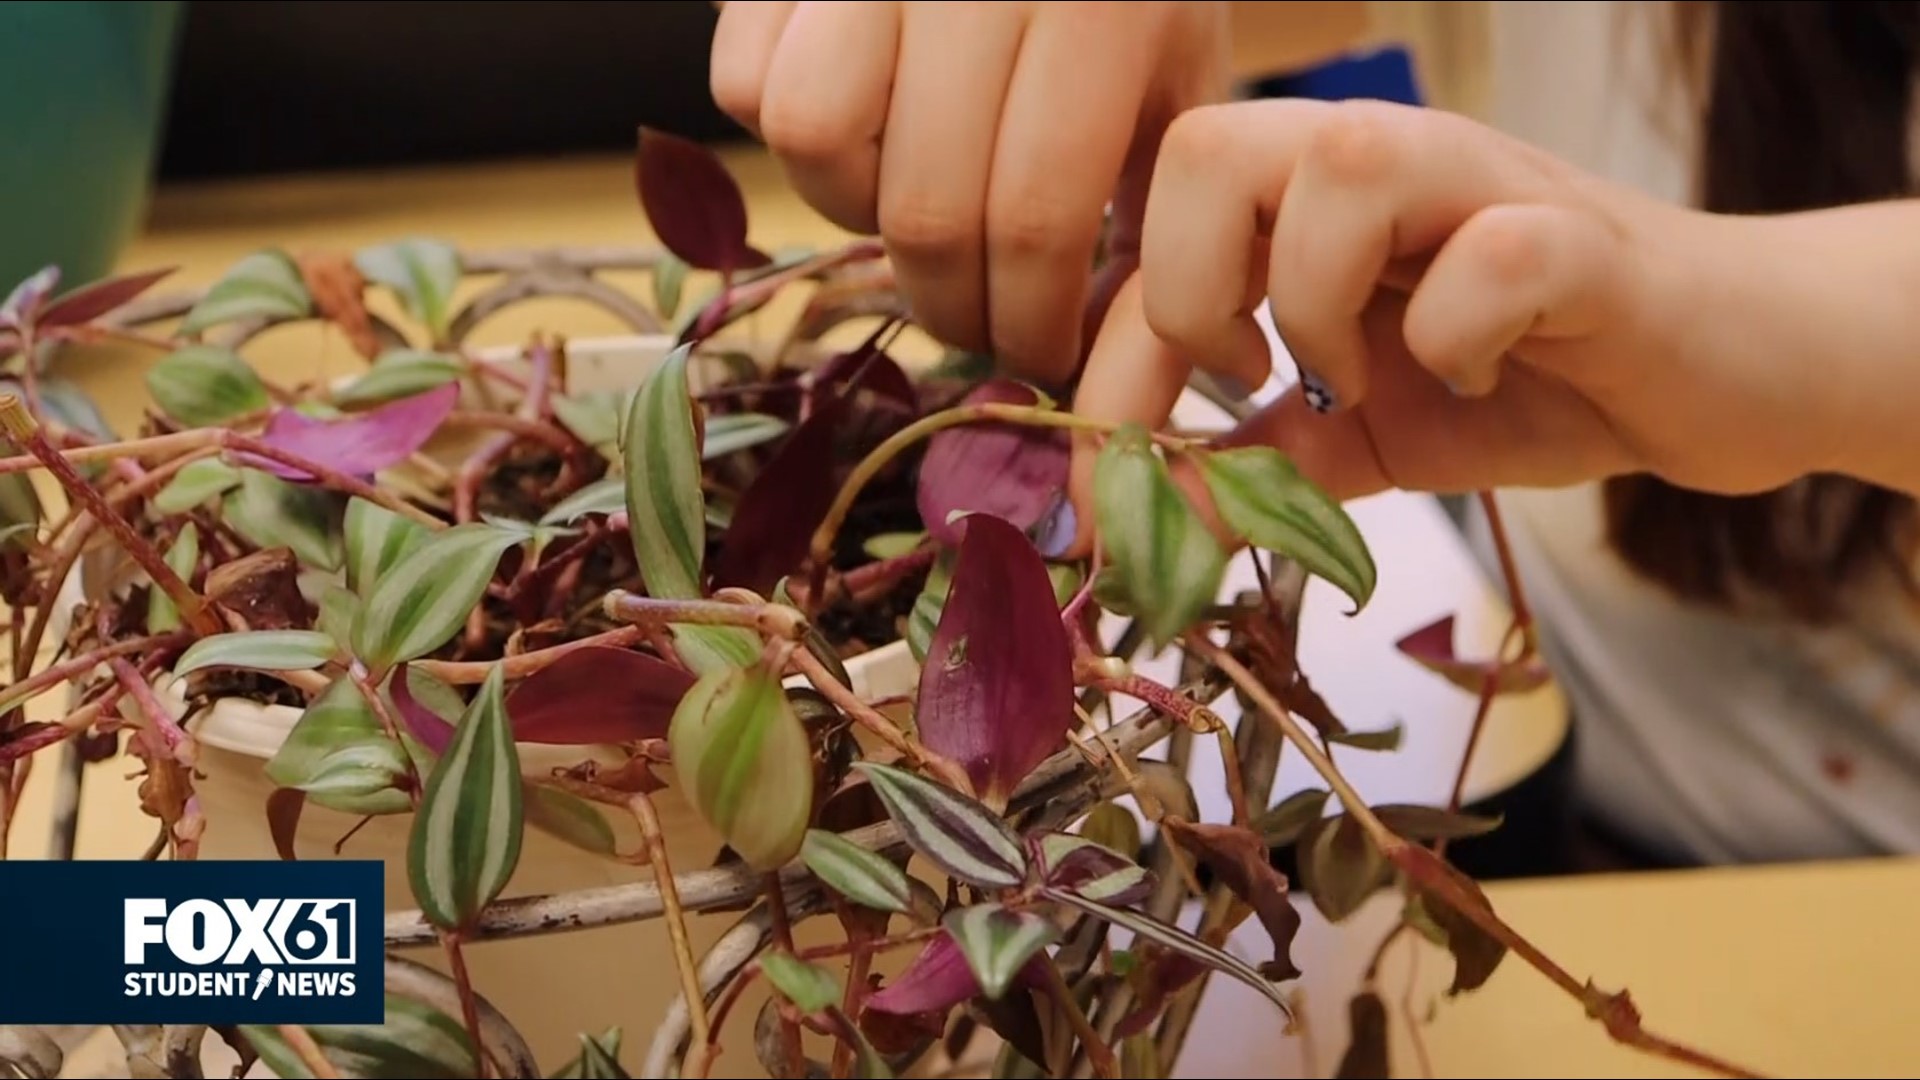 The plant name 'Wandering Jew' was found to be Anti-Semitic and has been officially changed.